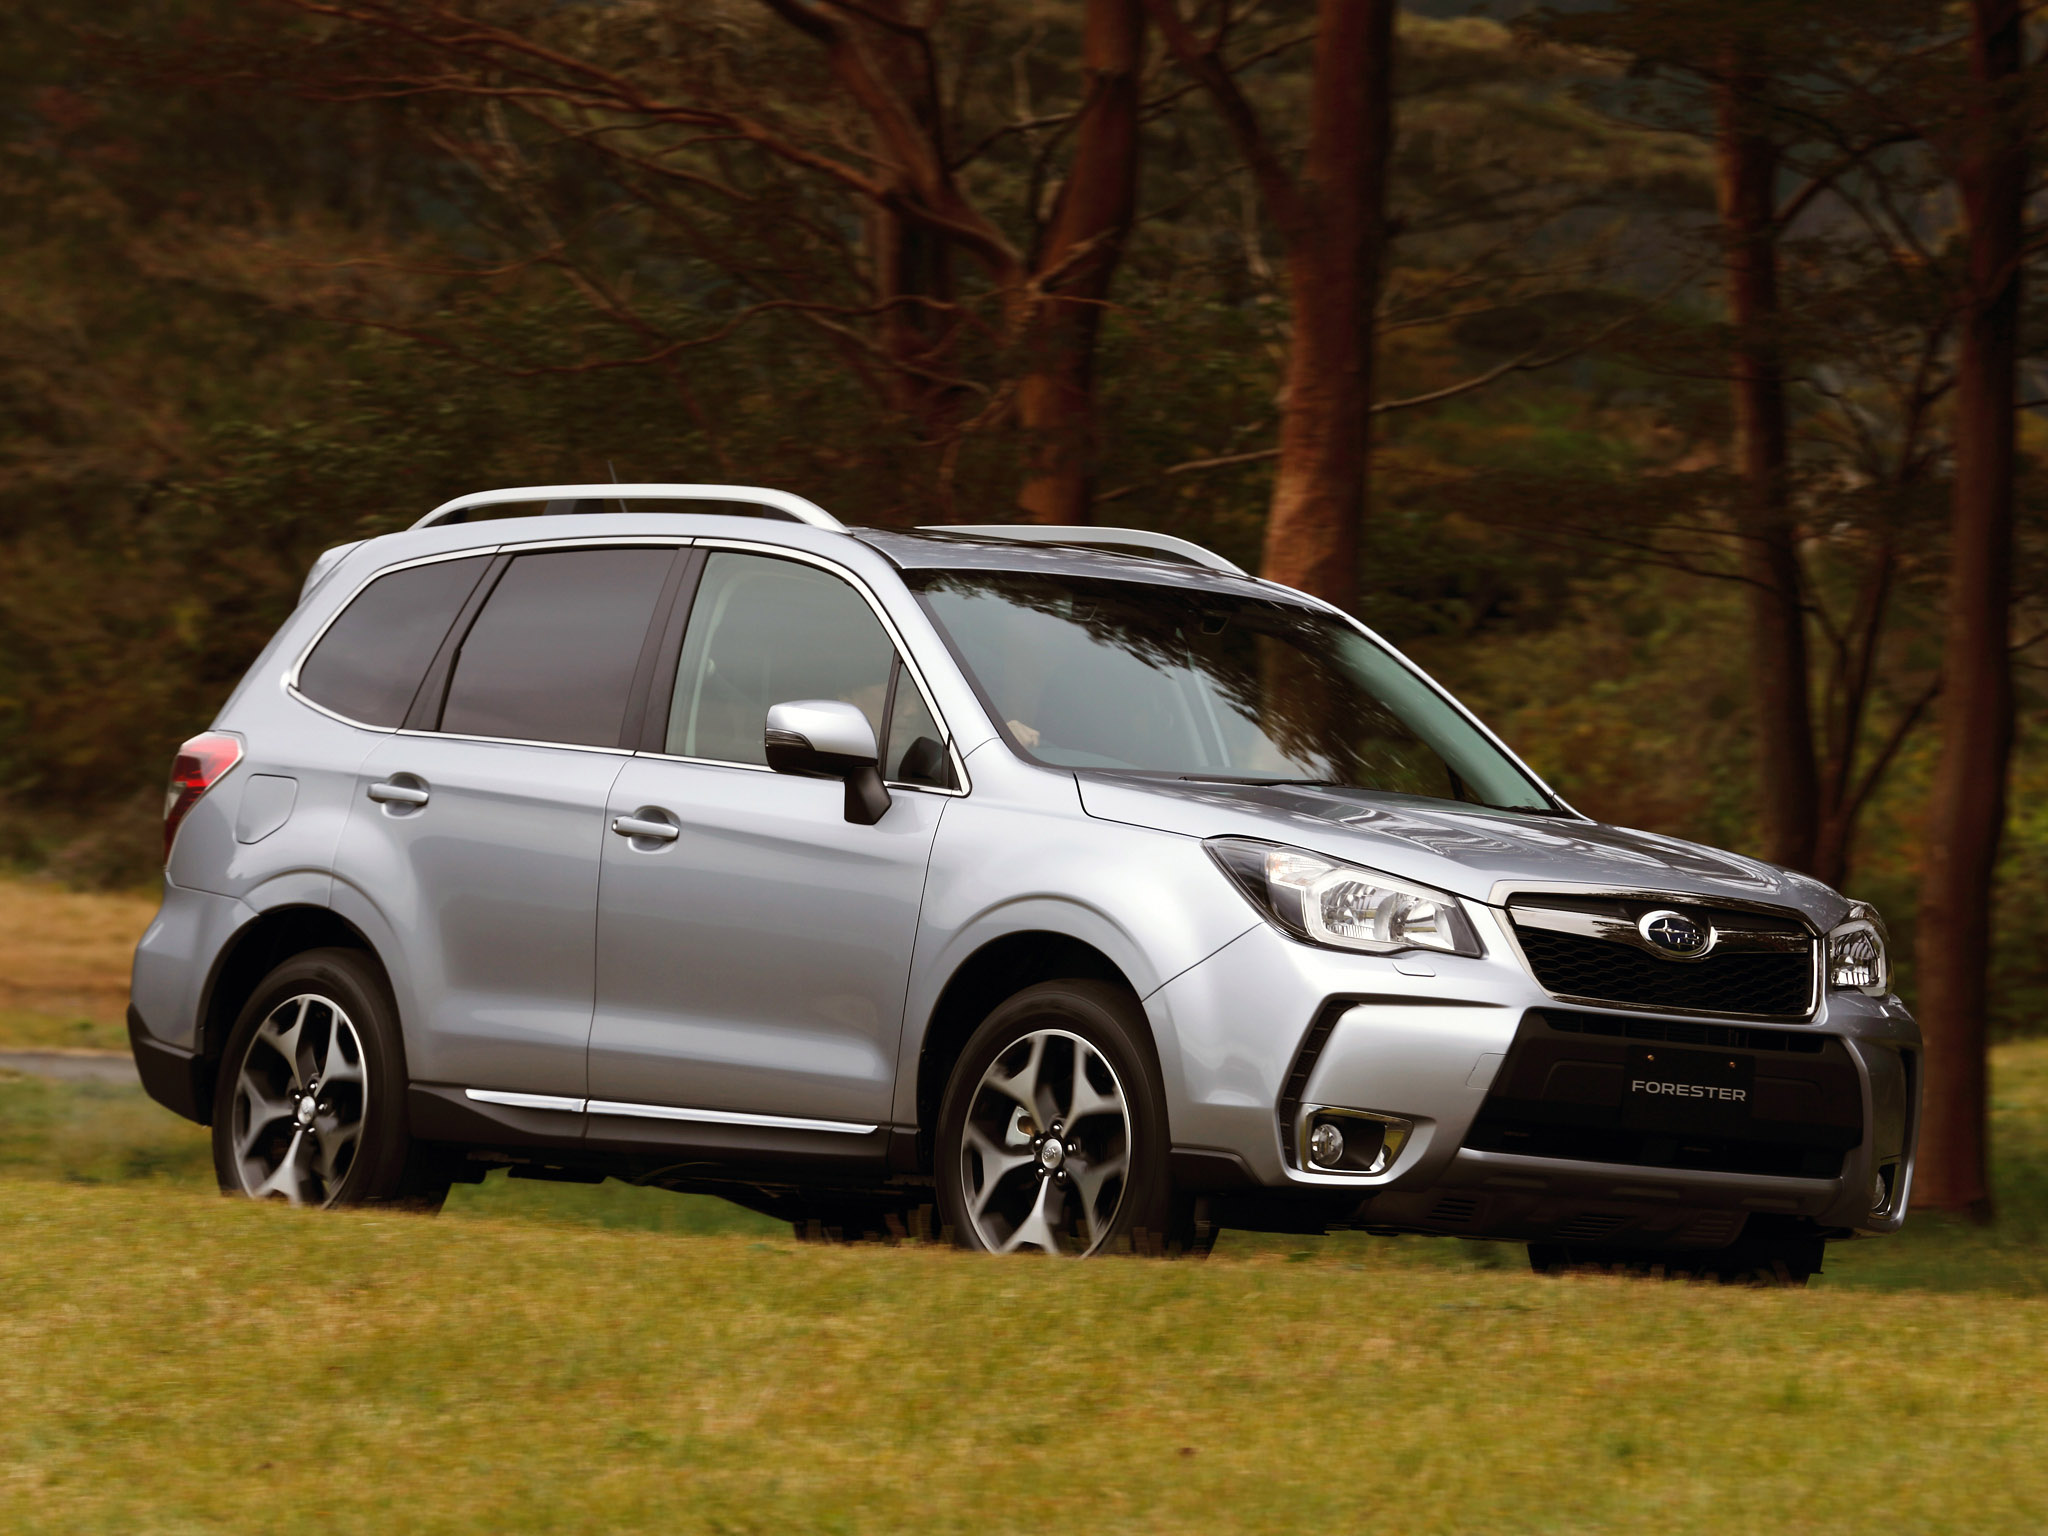 Car in pictures car photo gallery » Subaru forester xt